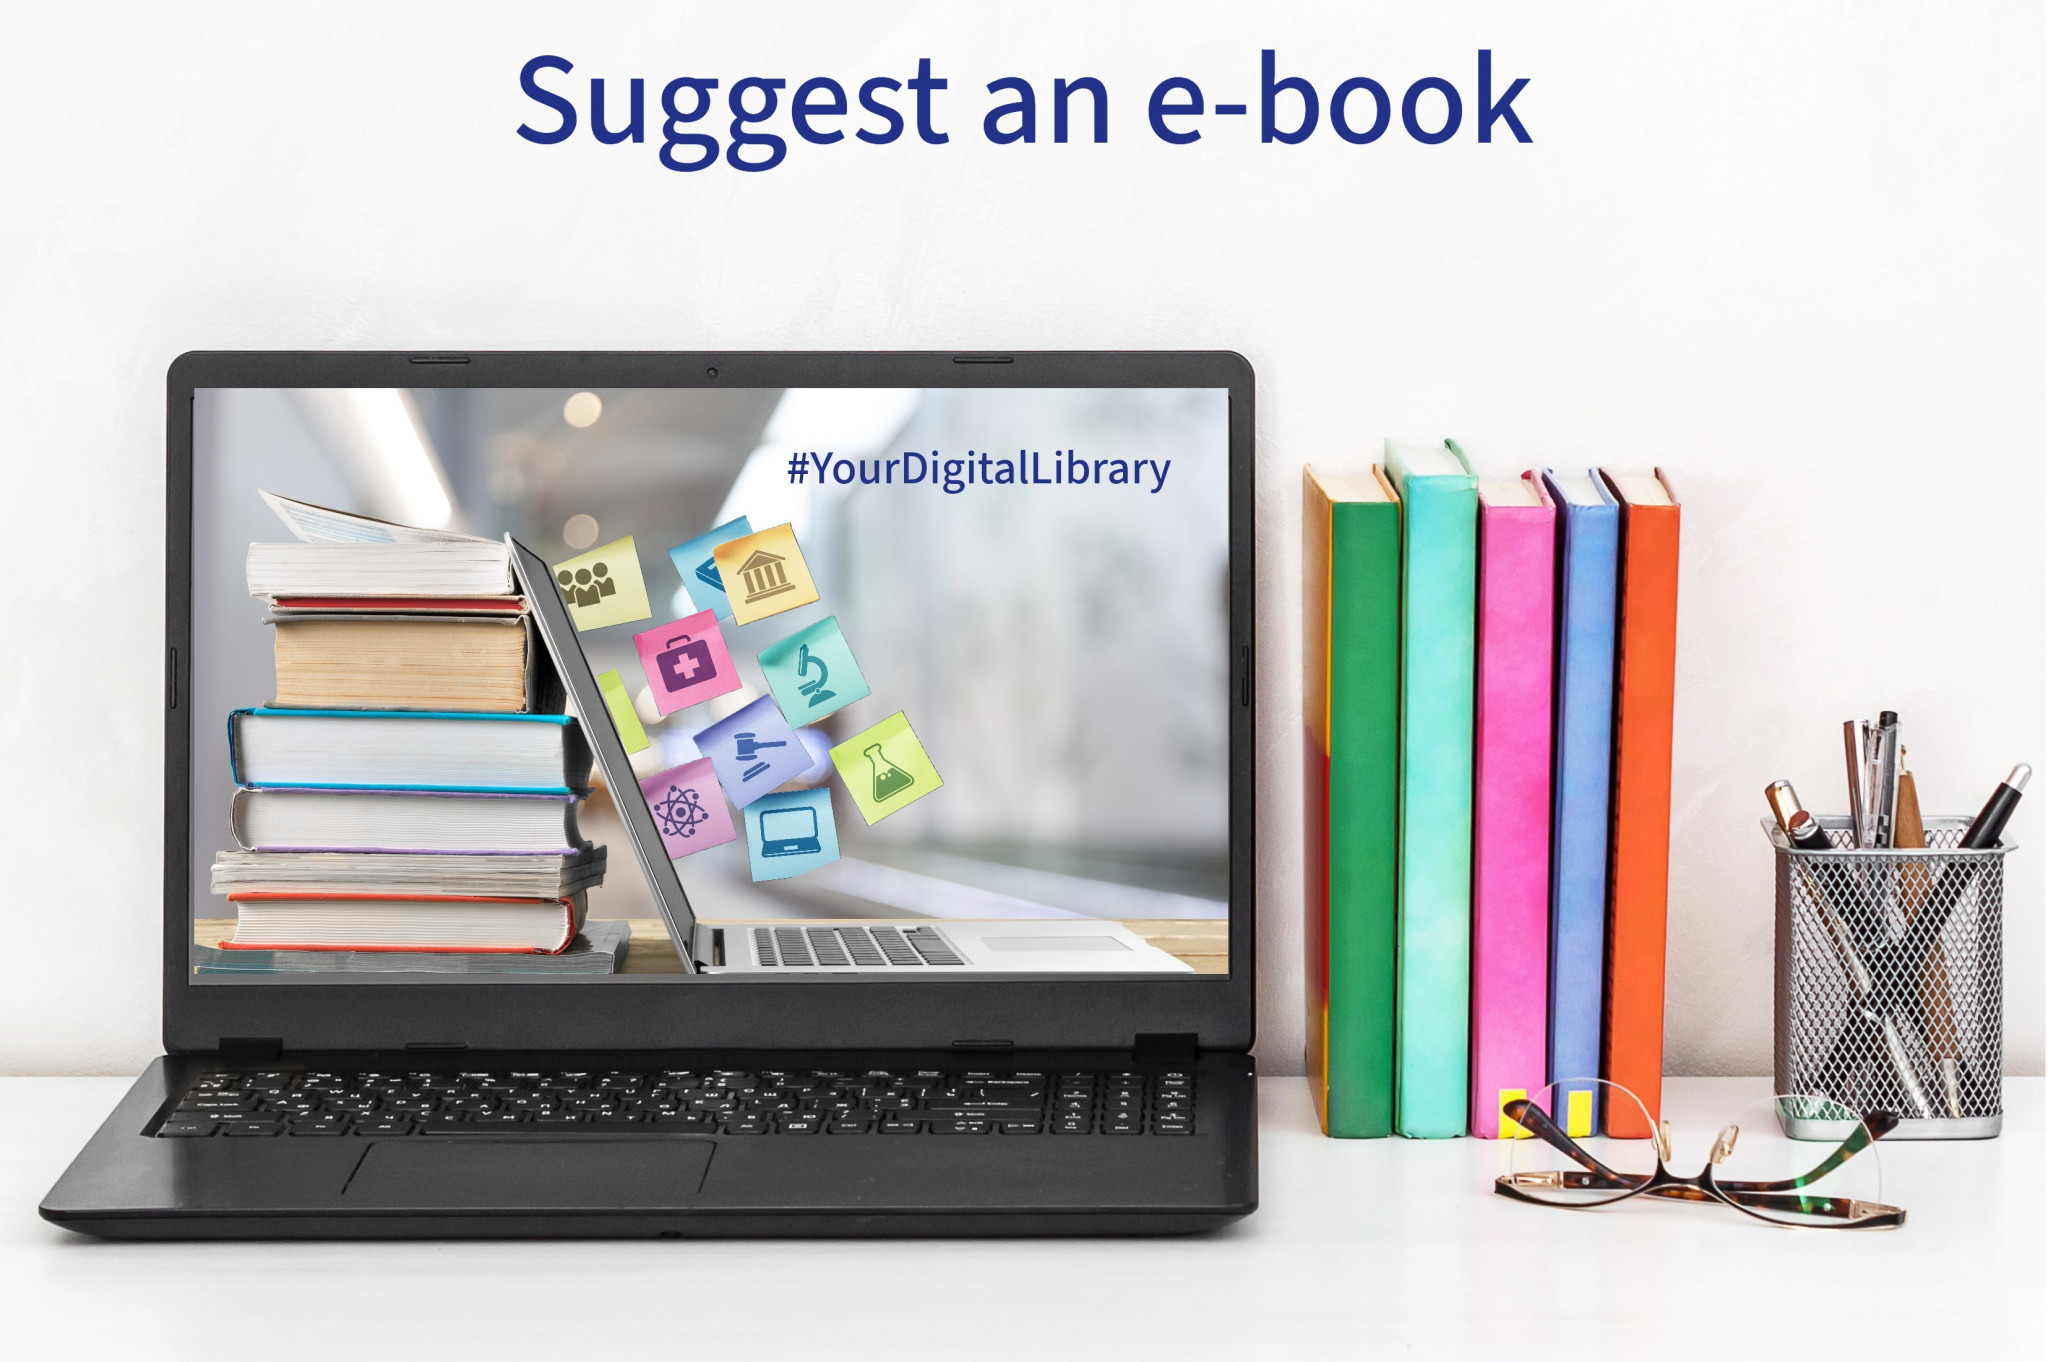 Suggest an e-book is back!  